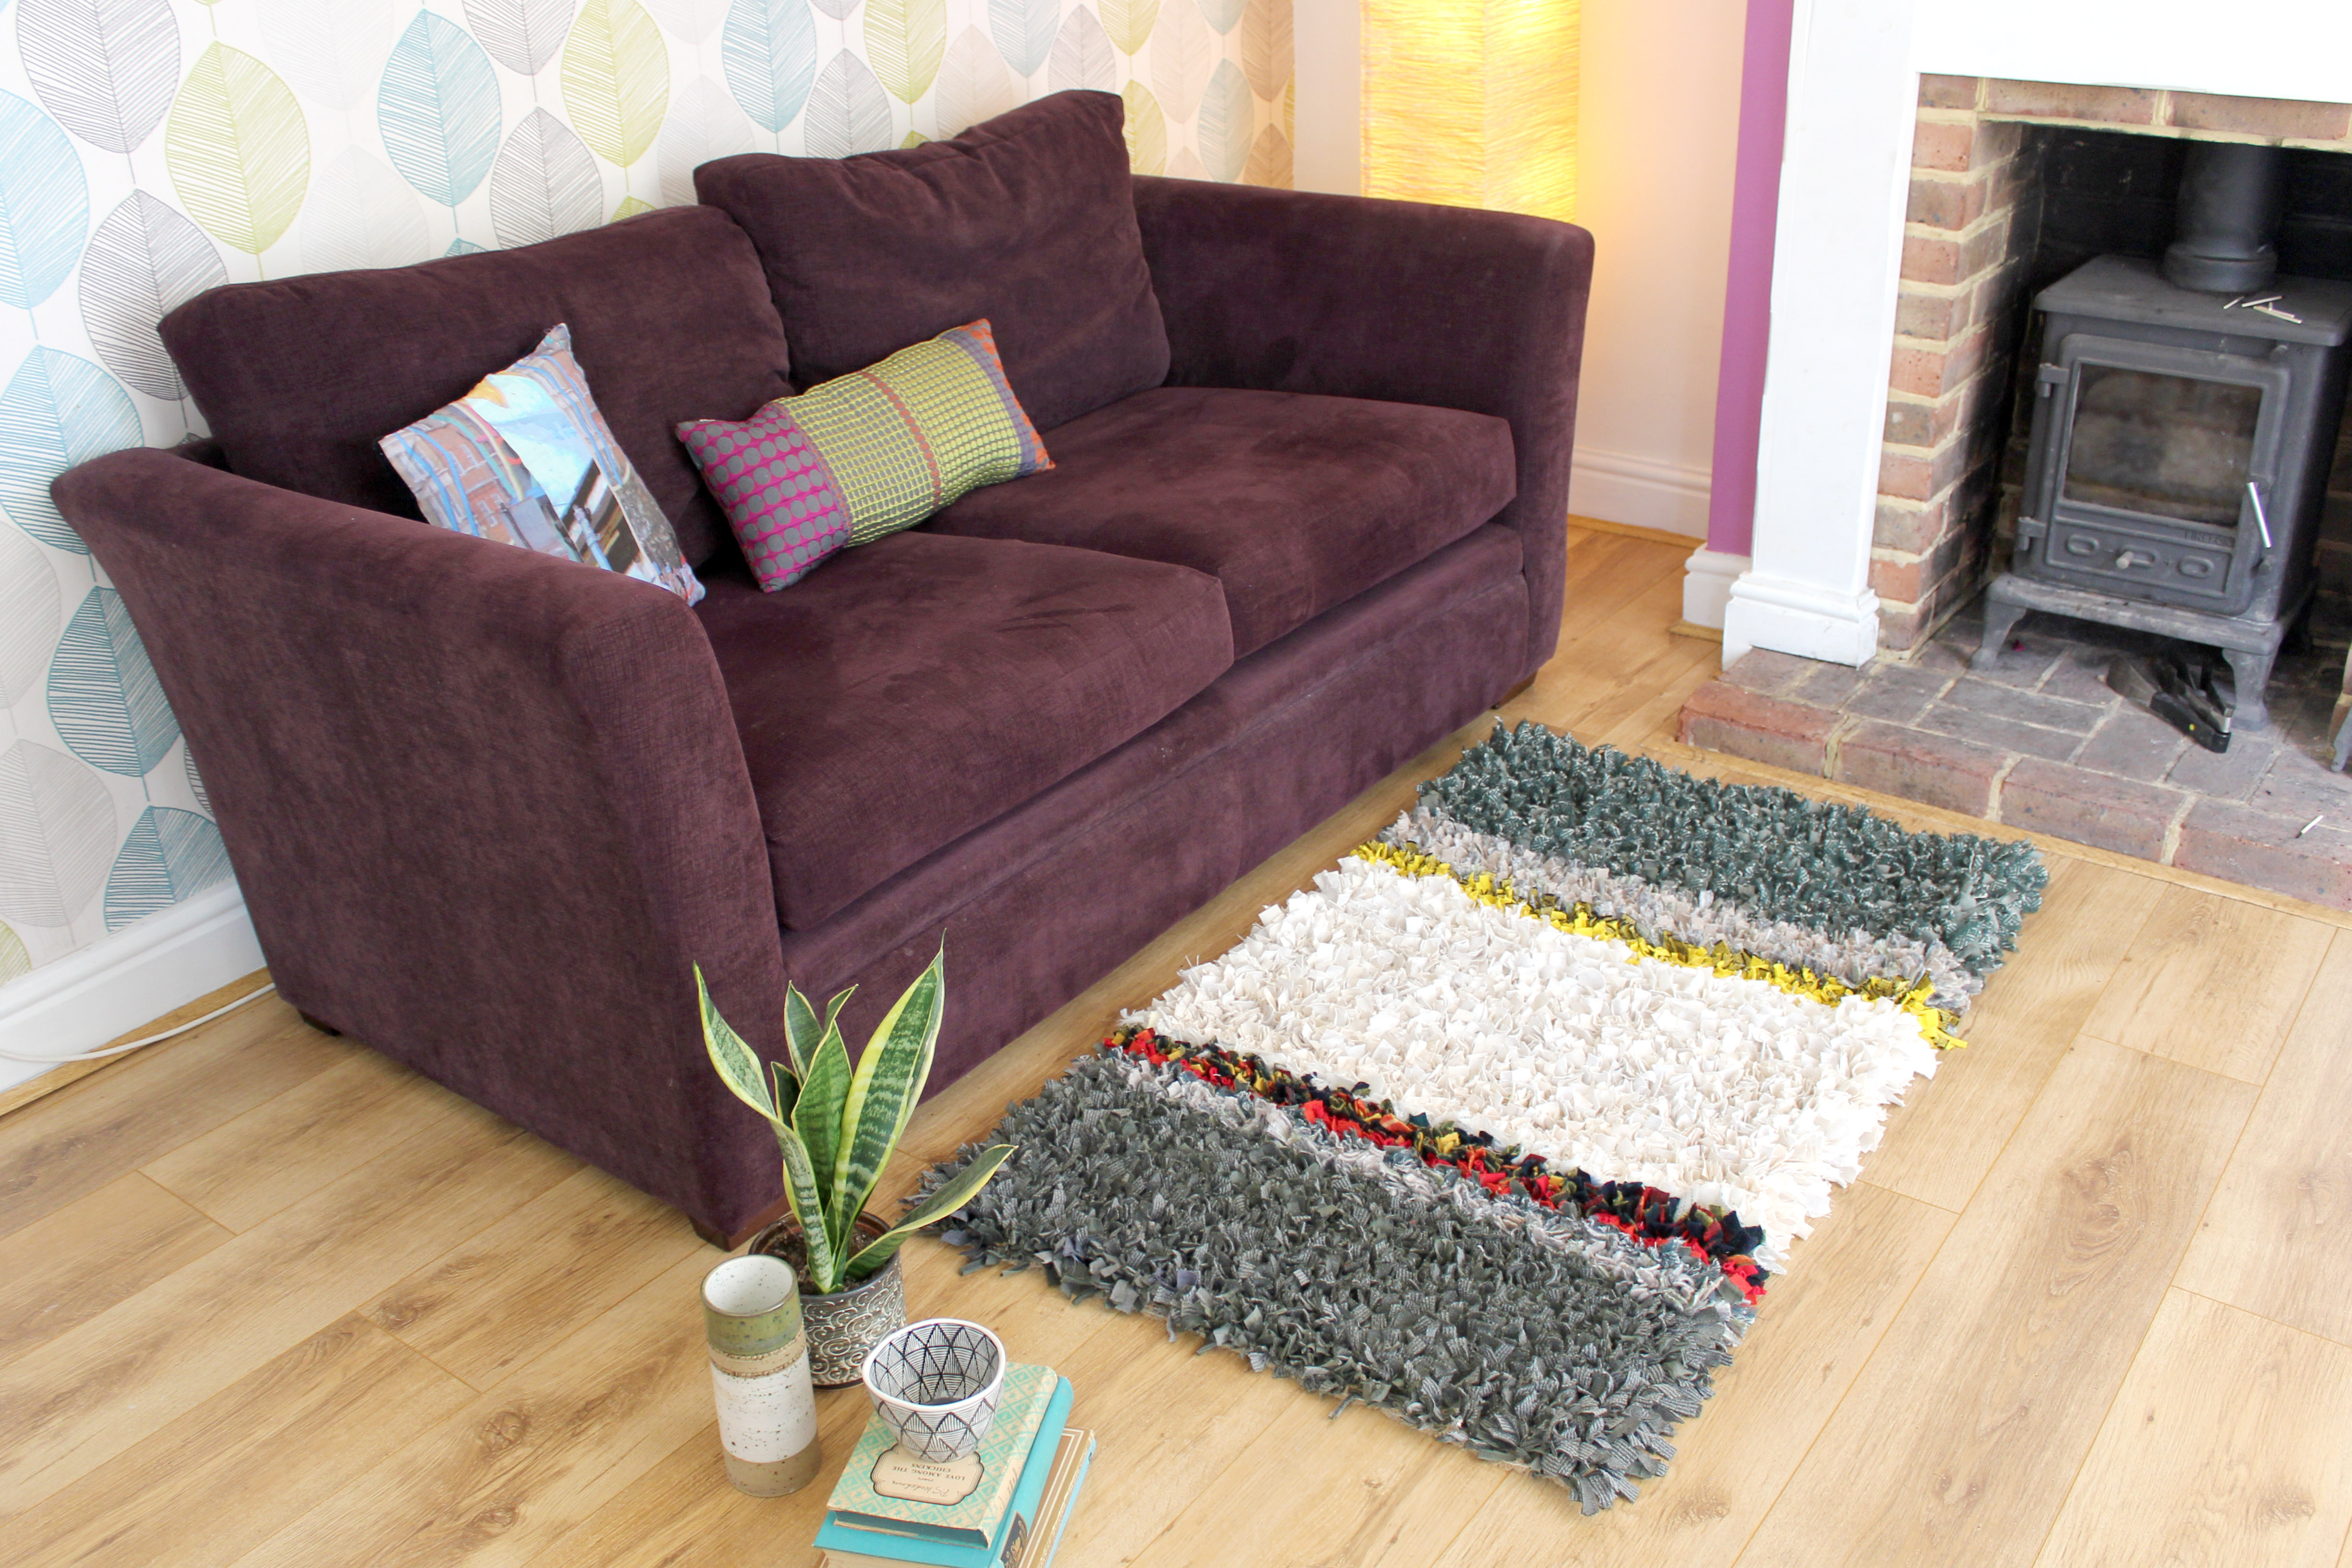 Cosy shaggy rag rug in front of sofa in living room made out of woollen material